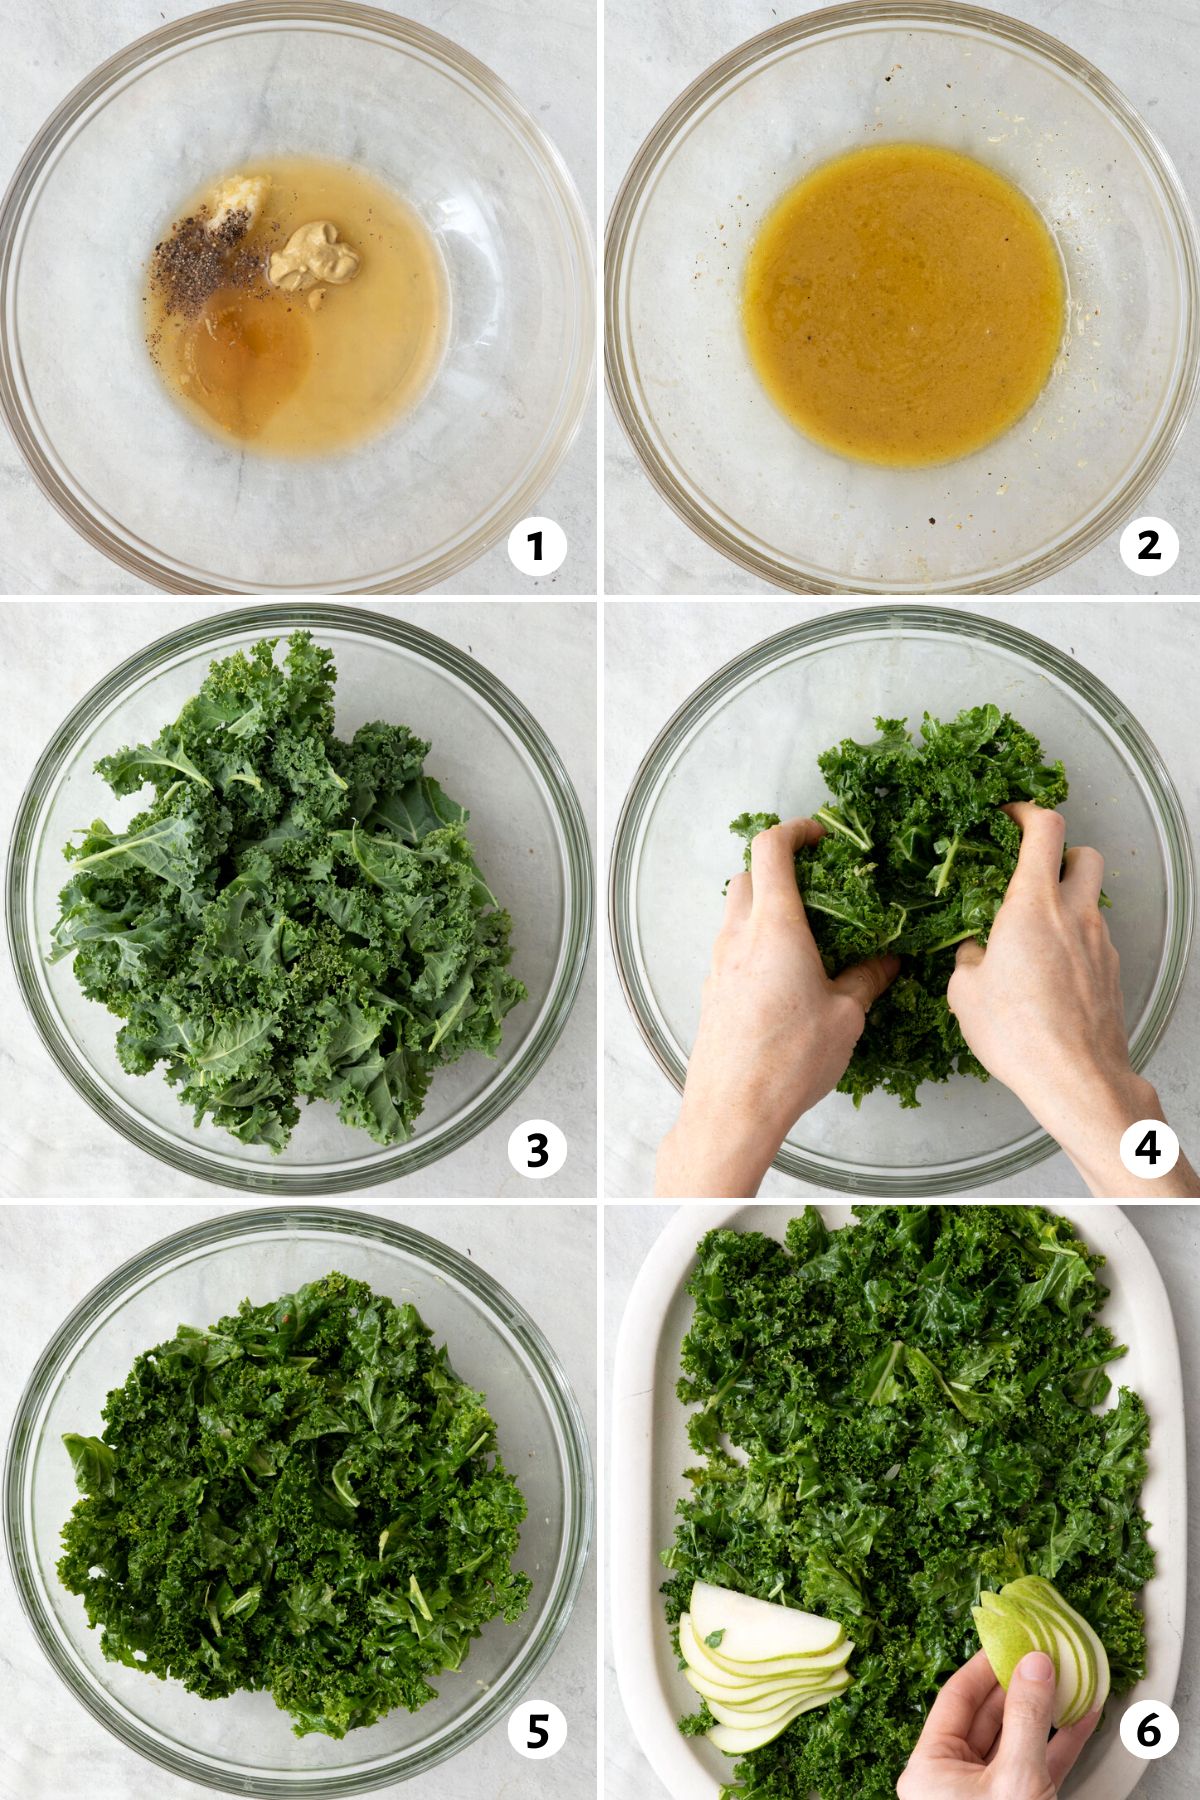 6 image collage preparing salad by mixing dressing ingredients in a bowl, adding fresh kale, massaging the dressing into kale, showing the bright green lettuce, and then topping it with fresh pear slices.